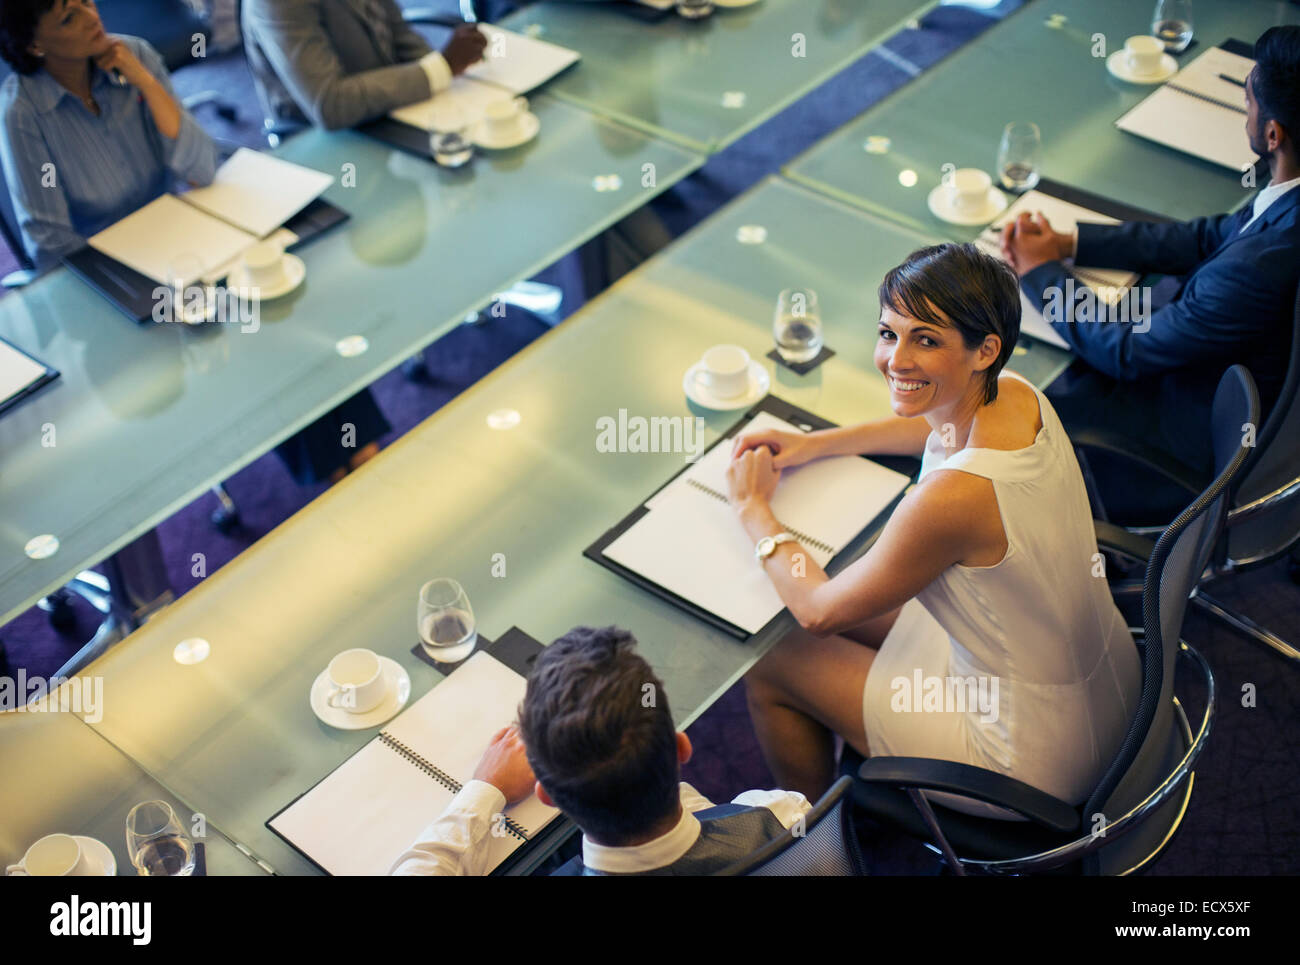 High angle view of smiling businesswoman looking at camera and sitting in conference room Stock Photo